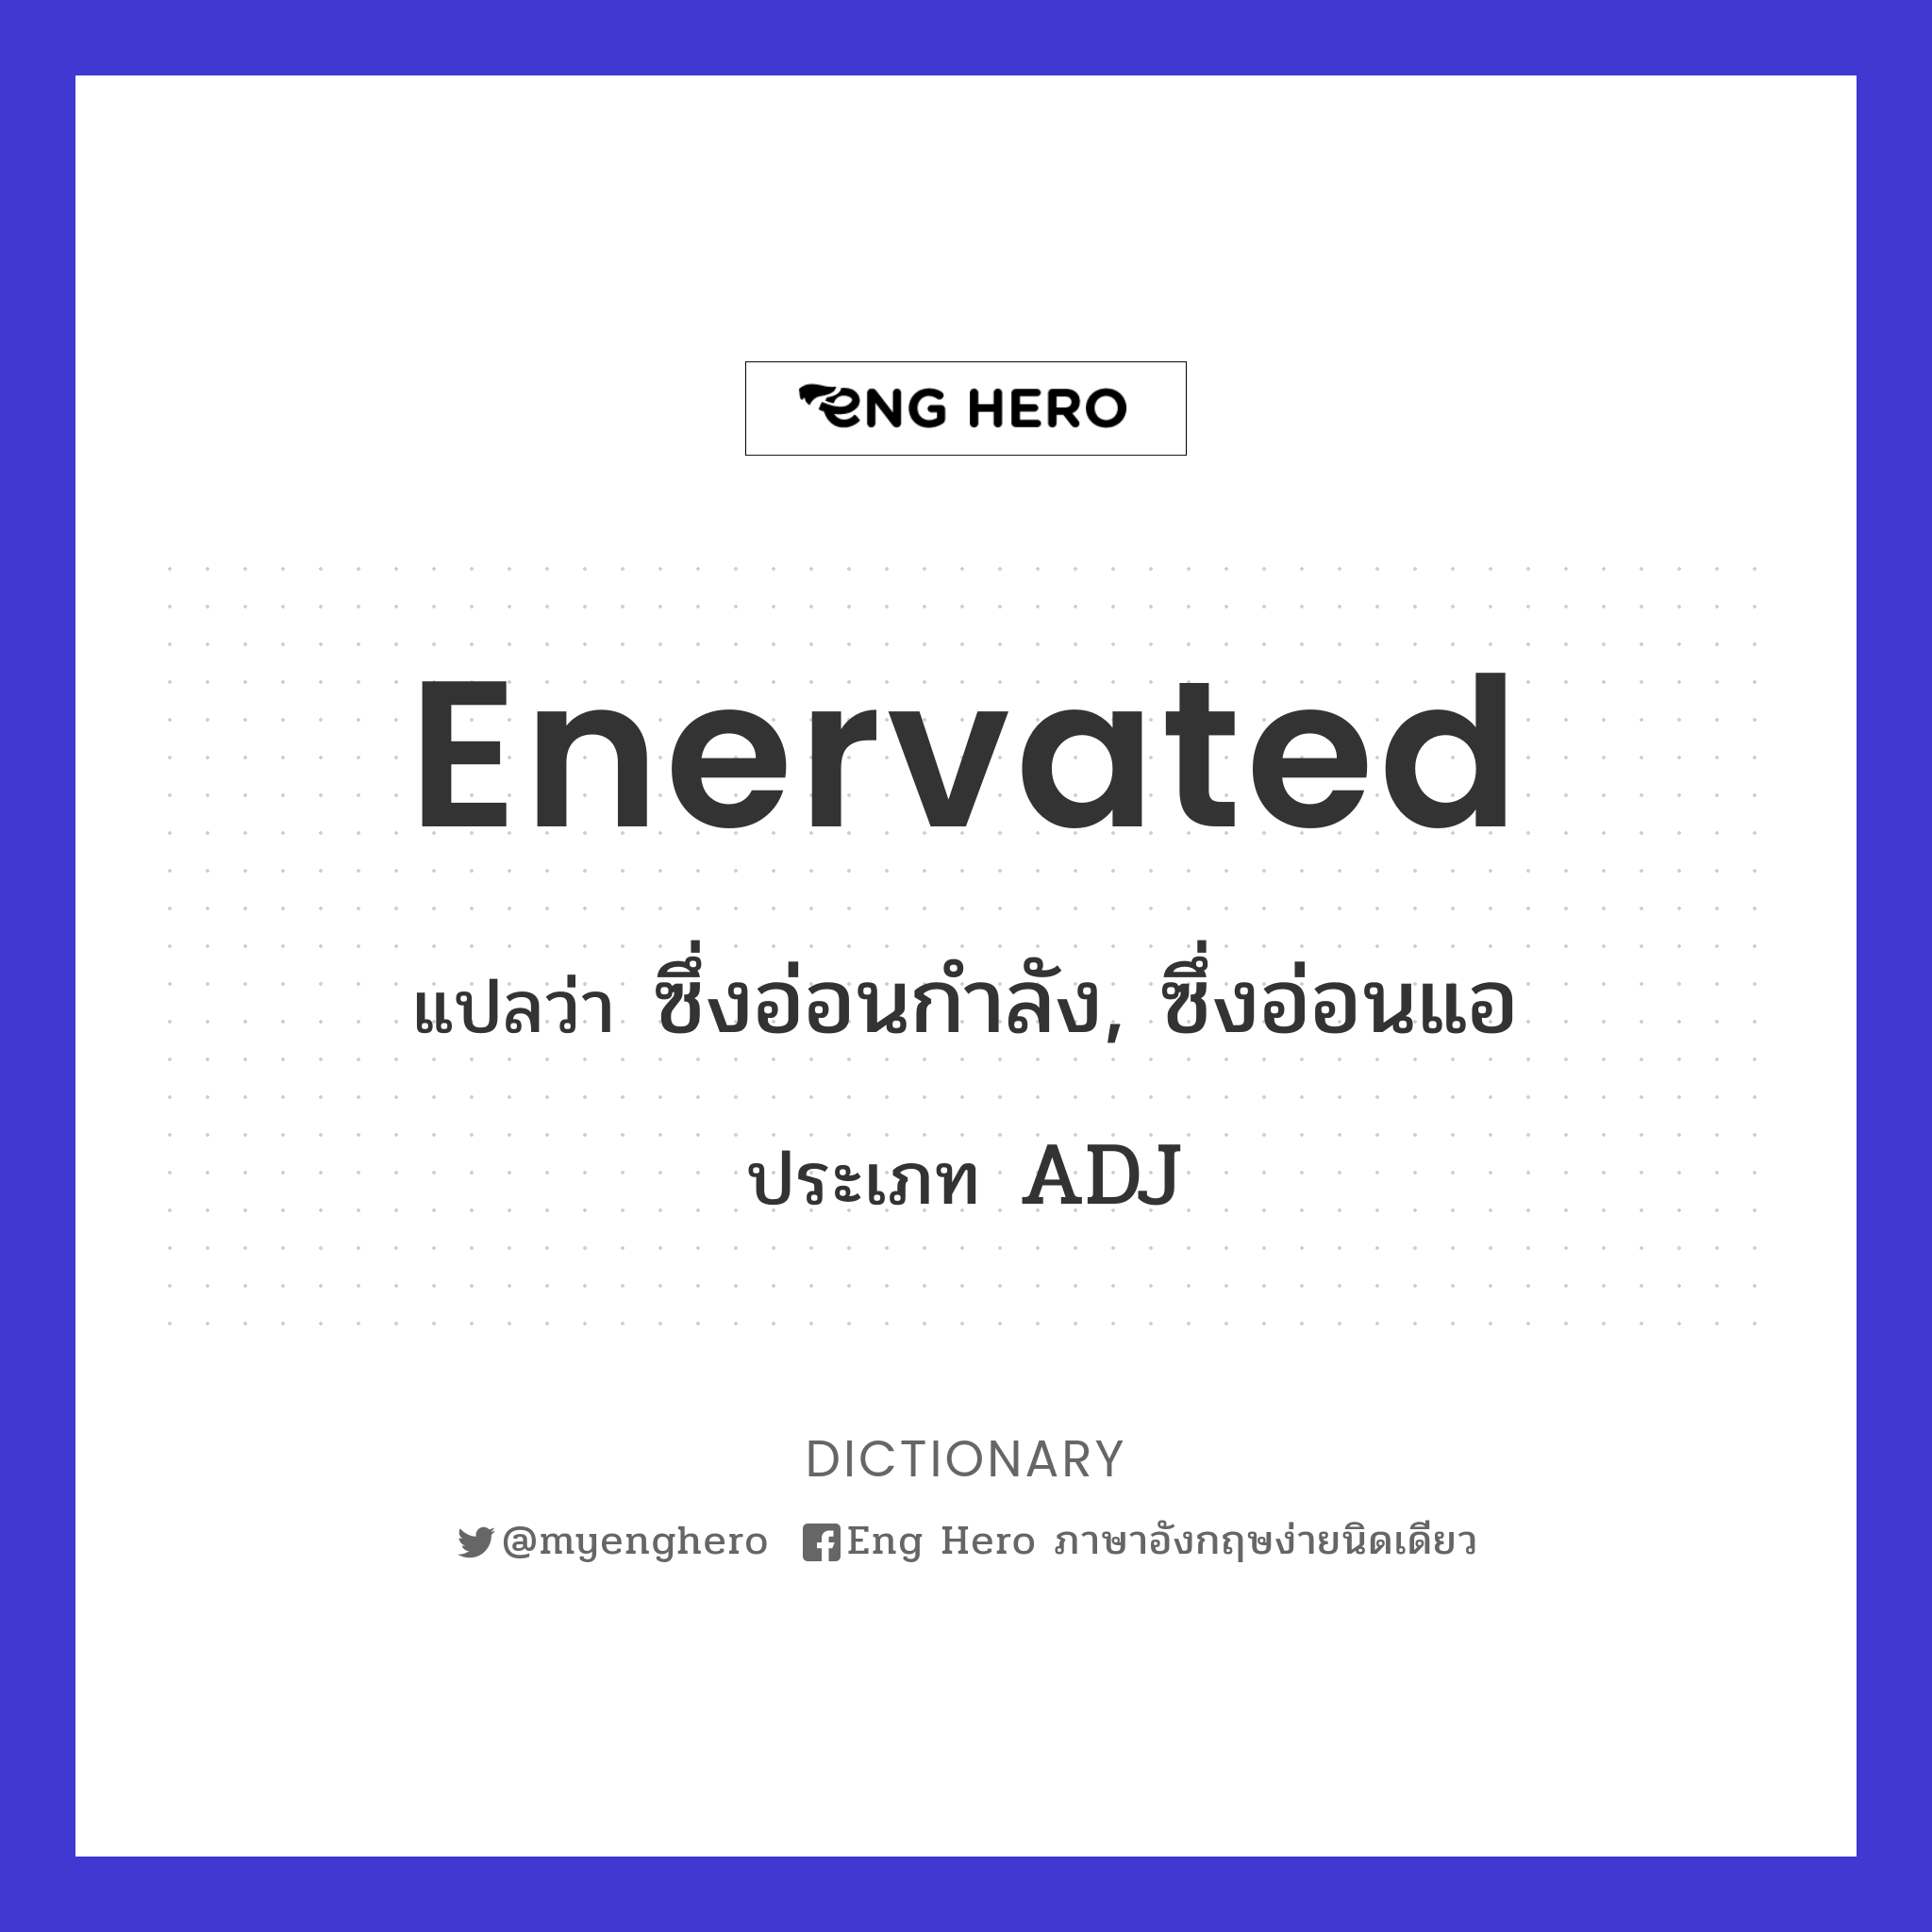 enervated